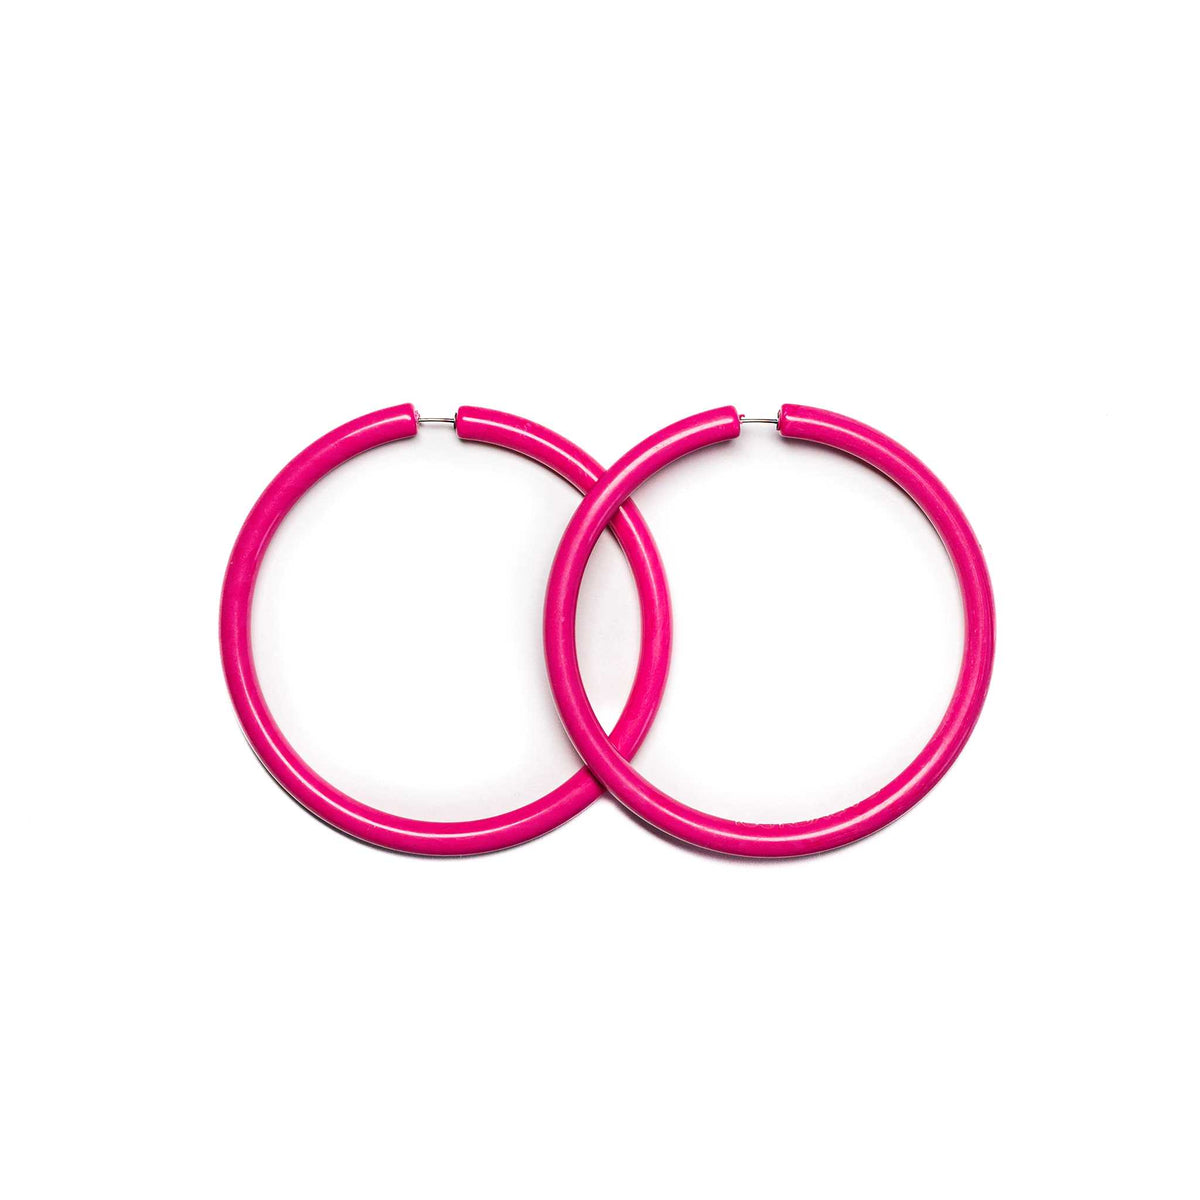 Carmen Sol hoop earrings, let your hoops do the talking from Day to Night.